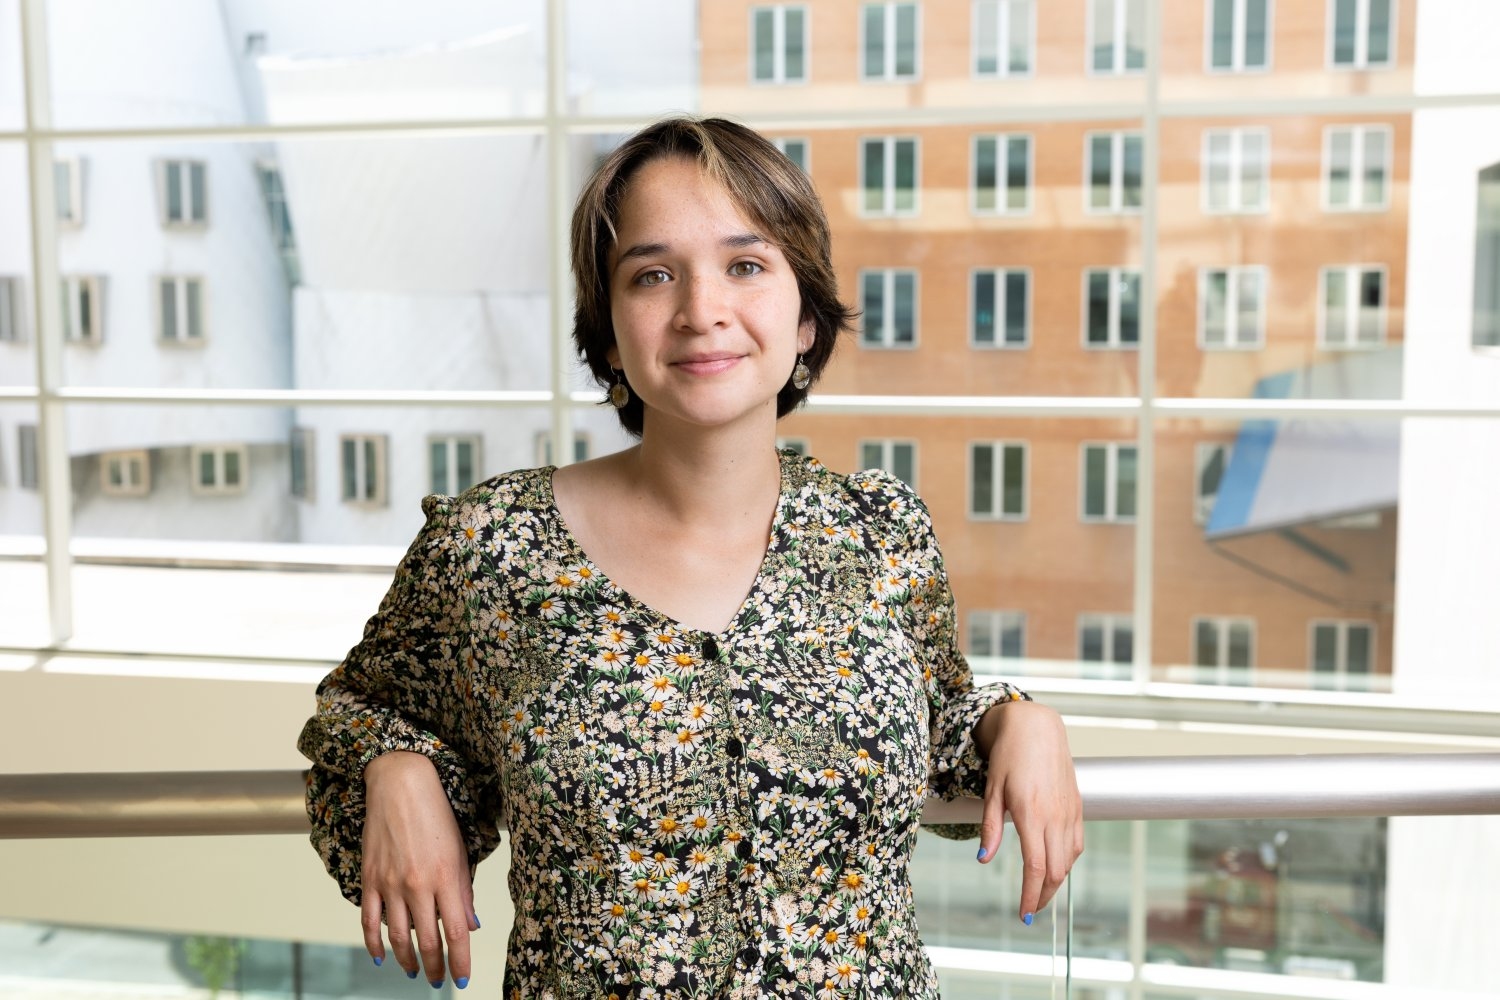 Doctoral student Fernanda de la Torre uses machine learning and artificial neural networks to understand sensory perception and how the brain distinguishes reality and imagination.